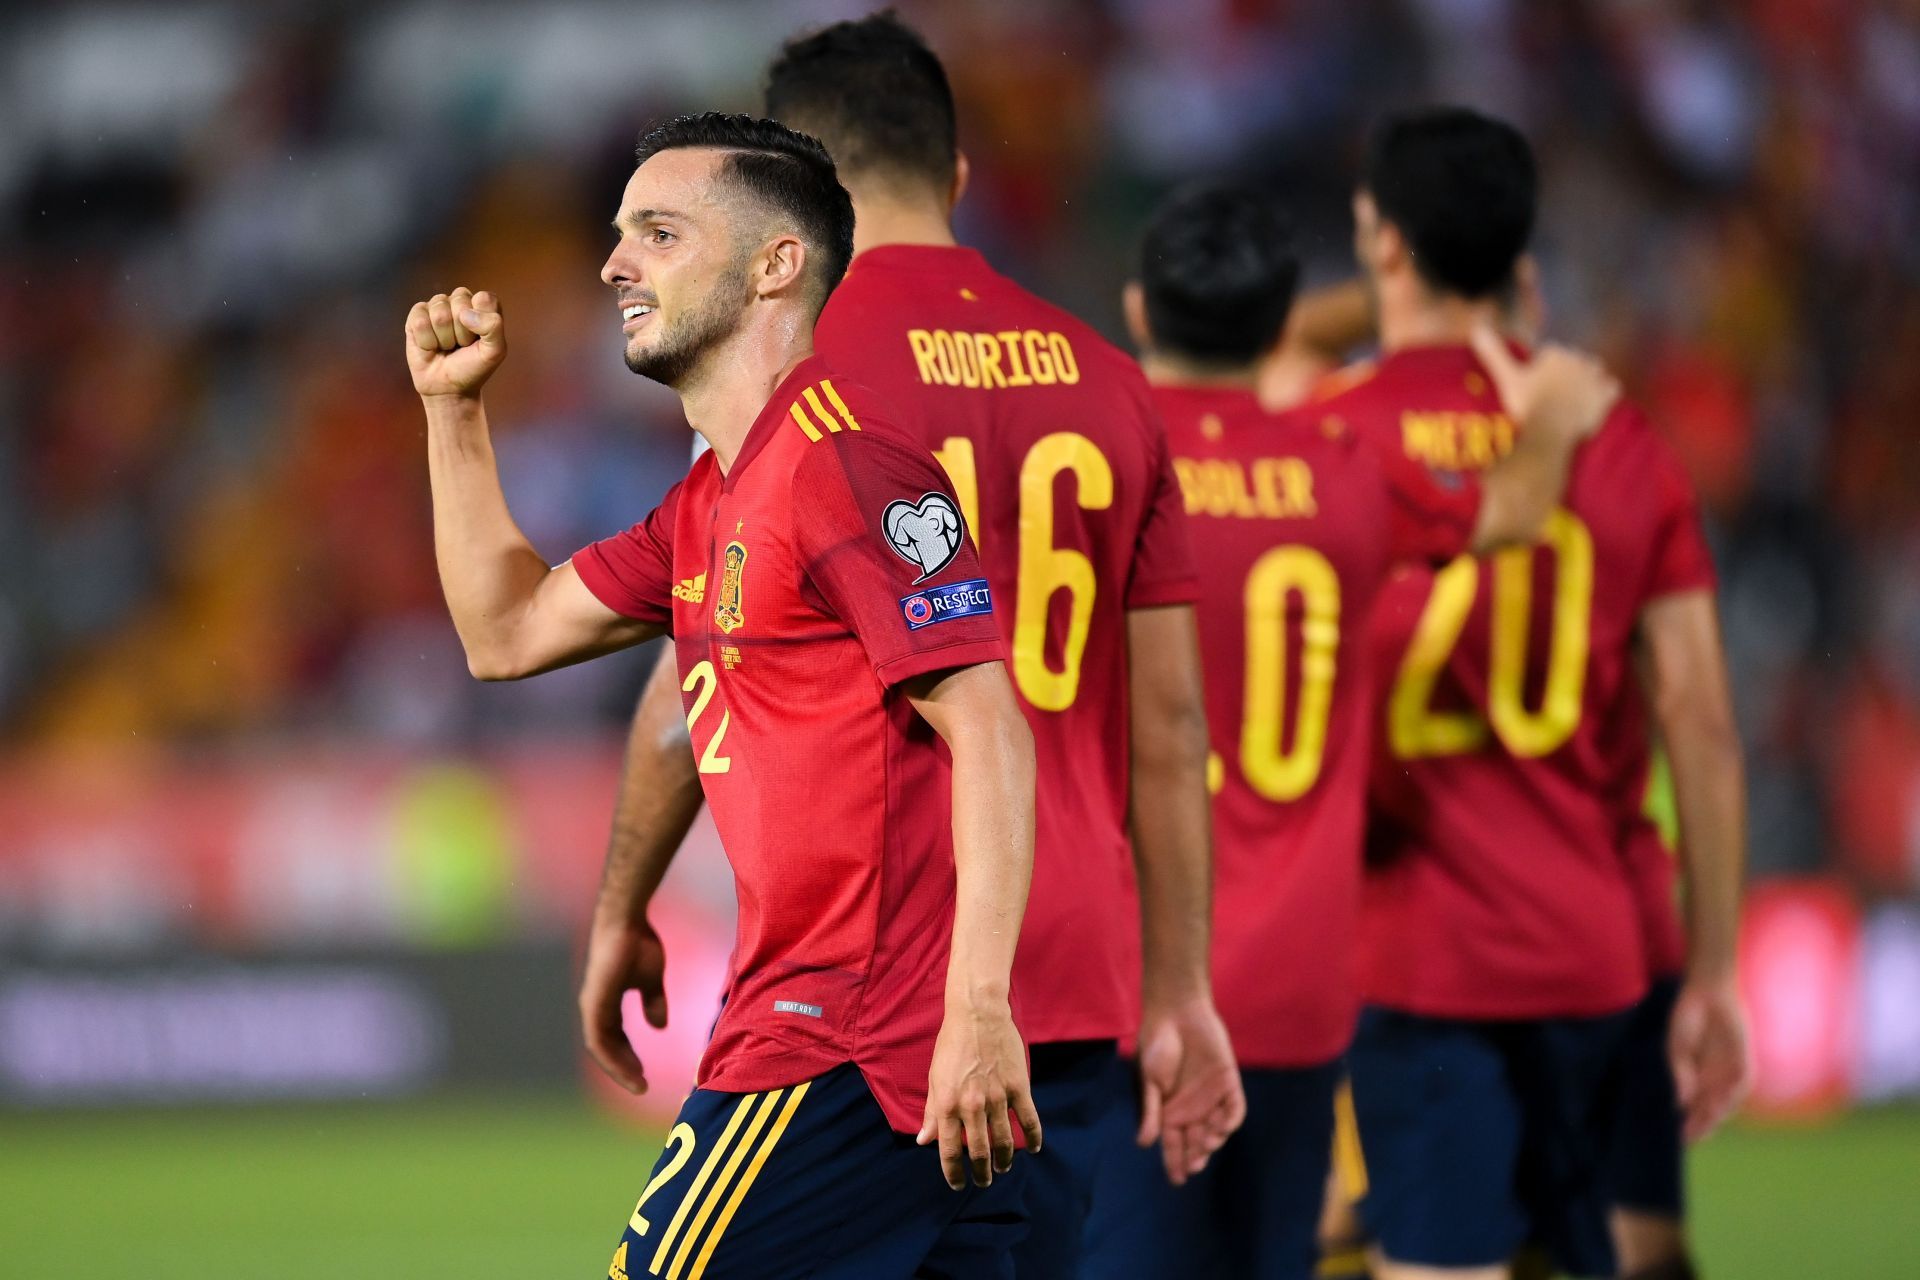 Spain will face Greece on Thursday - 2022 FIFA World Cup Qualifier